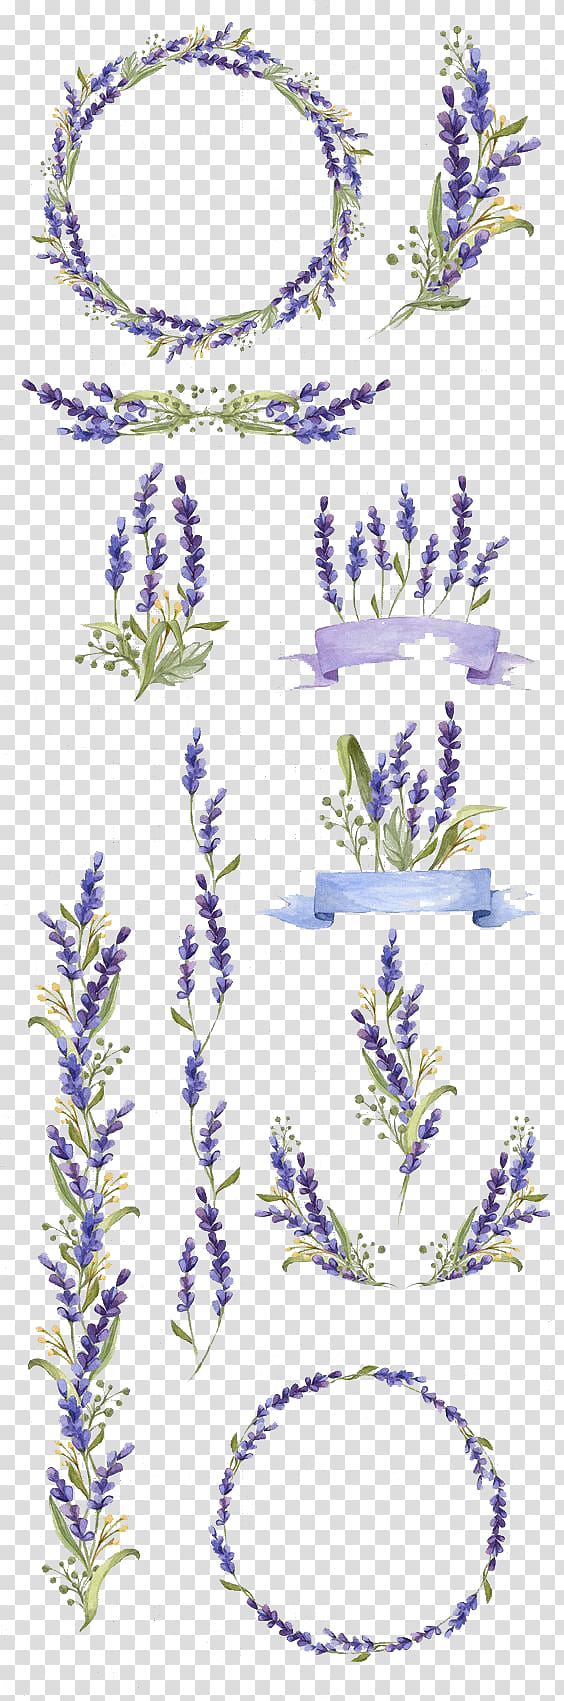 Watercolor painting Flower Art Lavender, Hand-painted flowers, purple and green floral decor lot collage transparent background PNG clipart